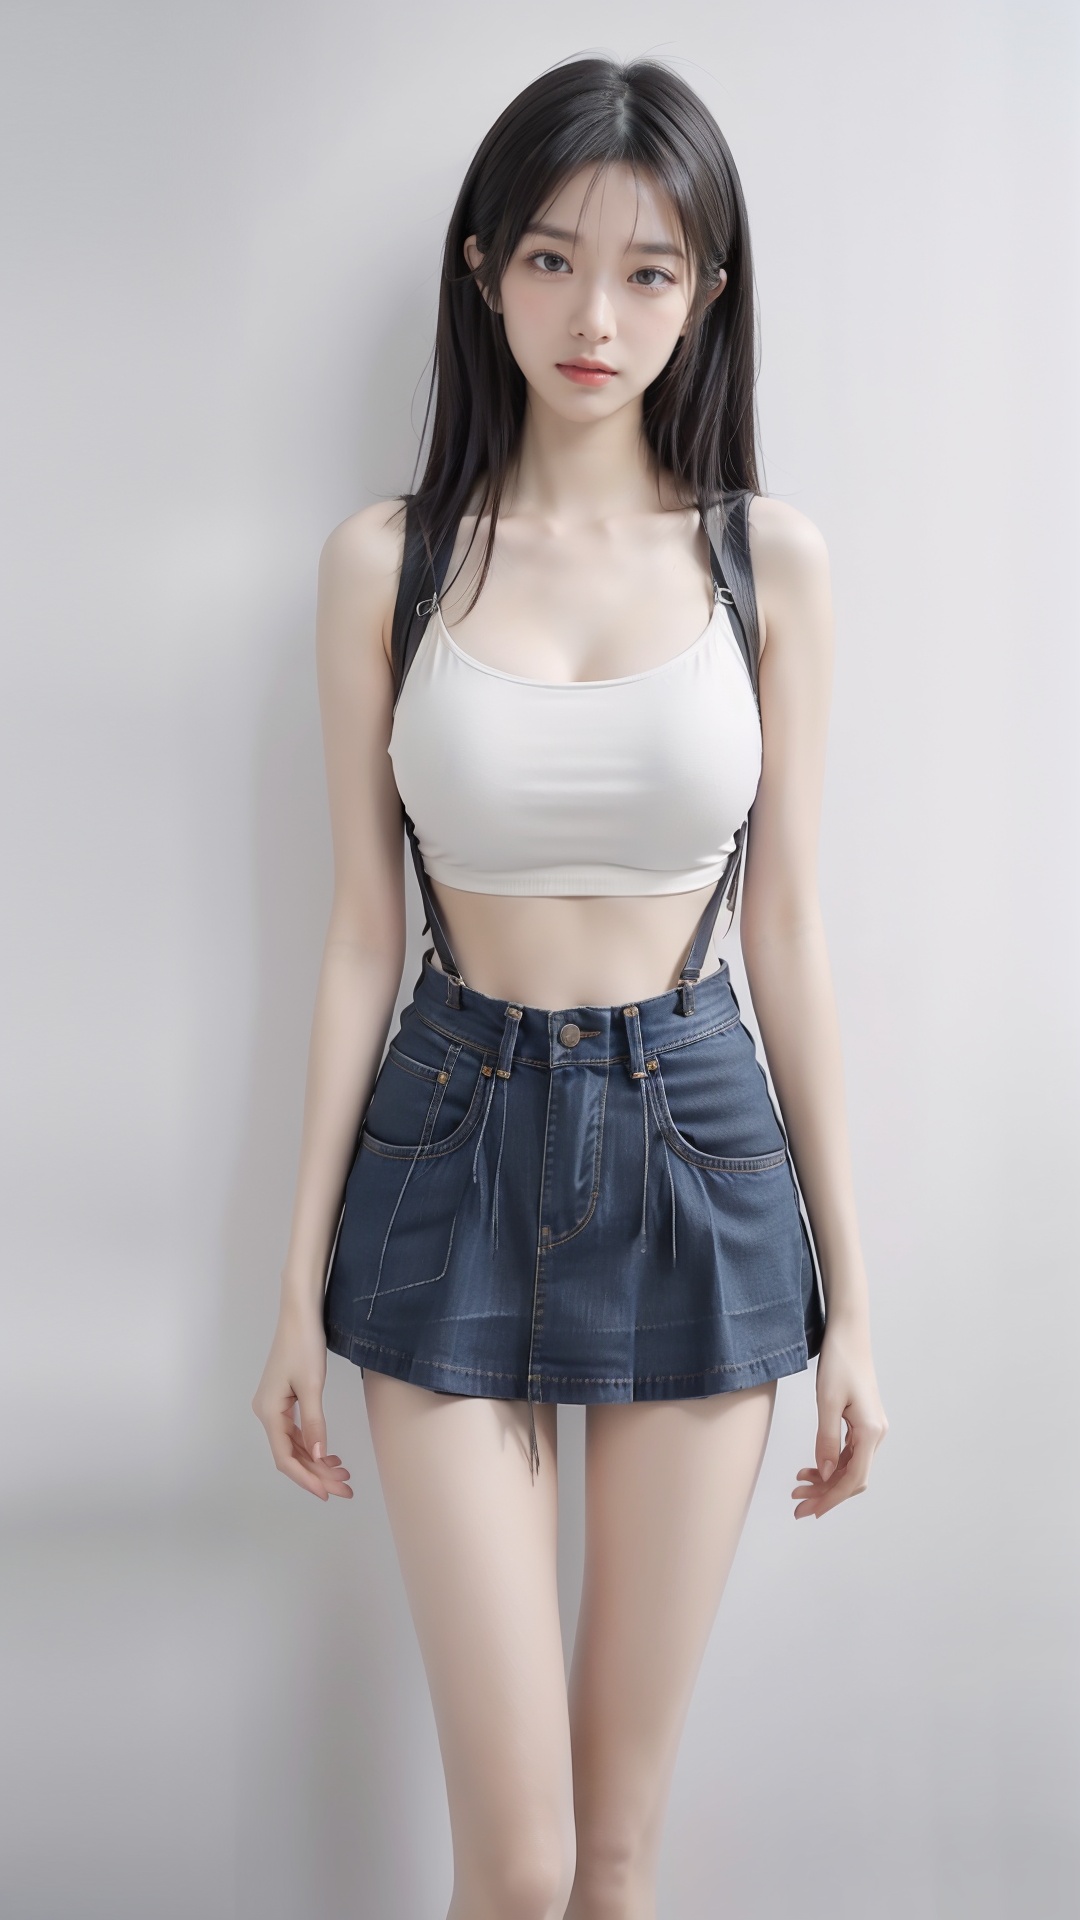  a girl,naked,long leg,Denim super short skirt,The thin gauze material suspender makes the breasts appear faintly,huge breast,without tops